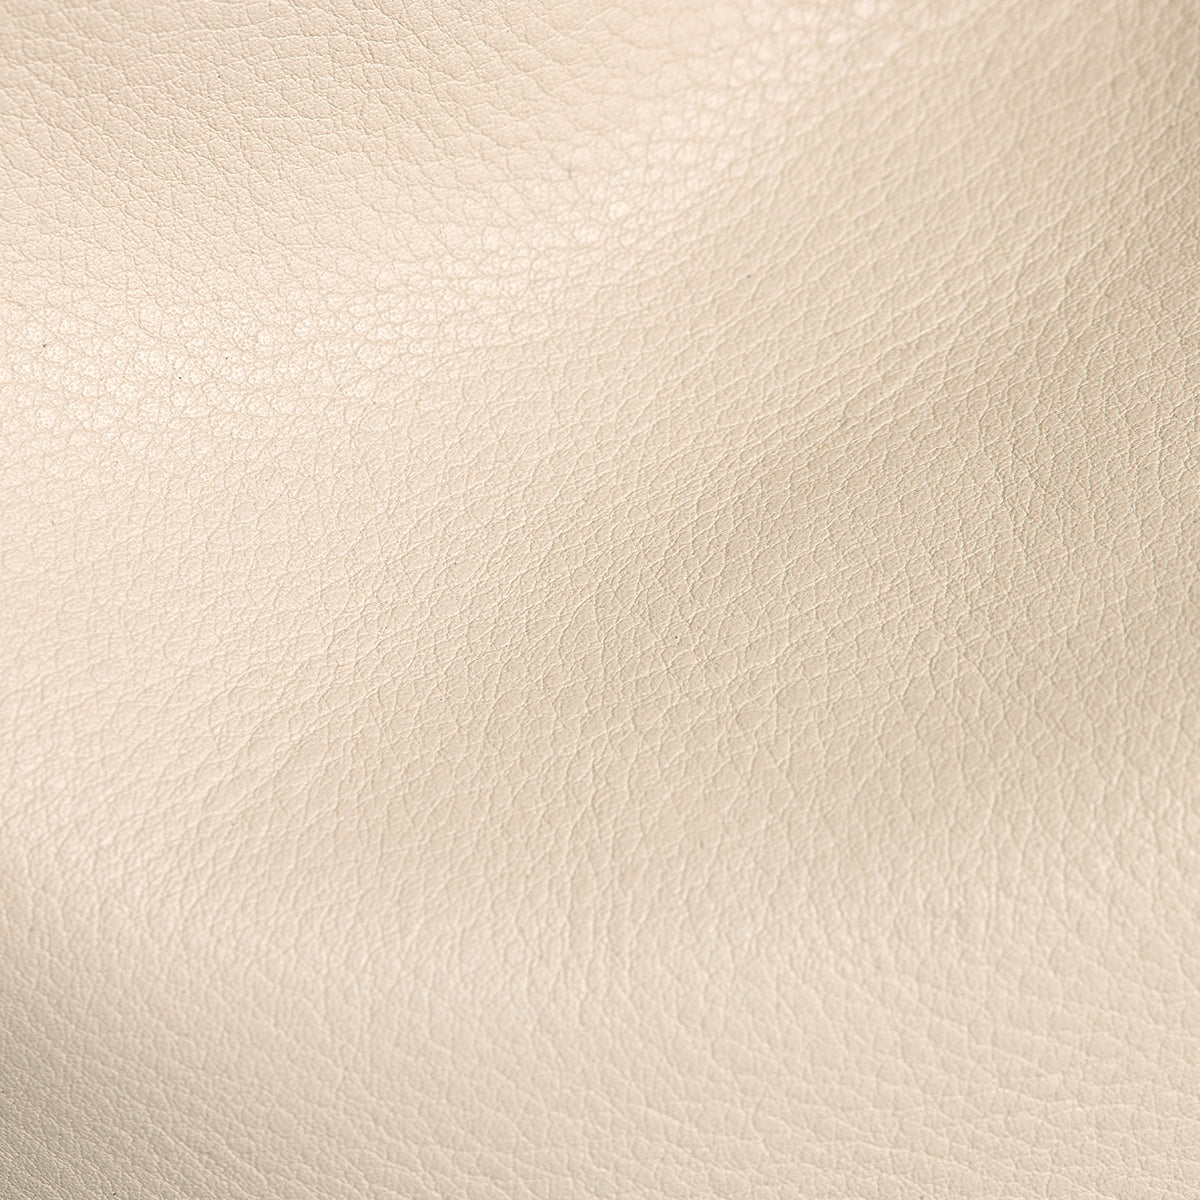 VIP-Satchel-Chateau-Cream-Leather-Swatch